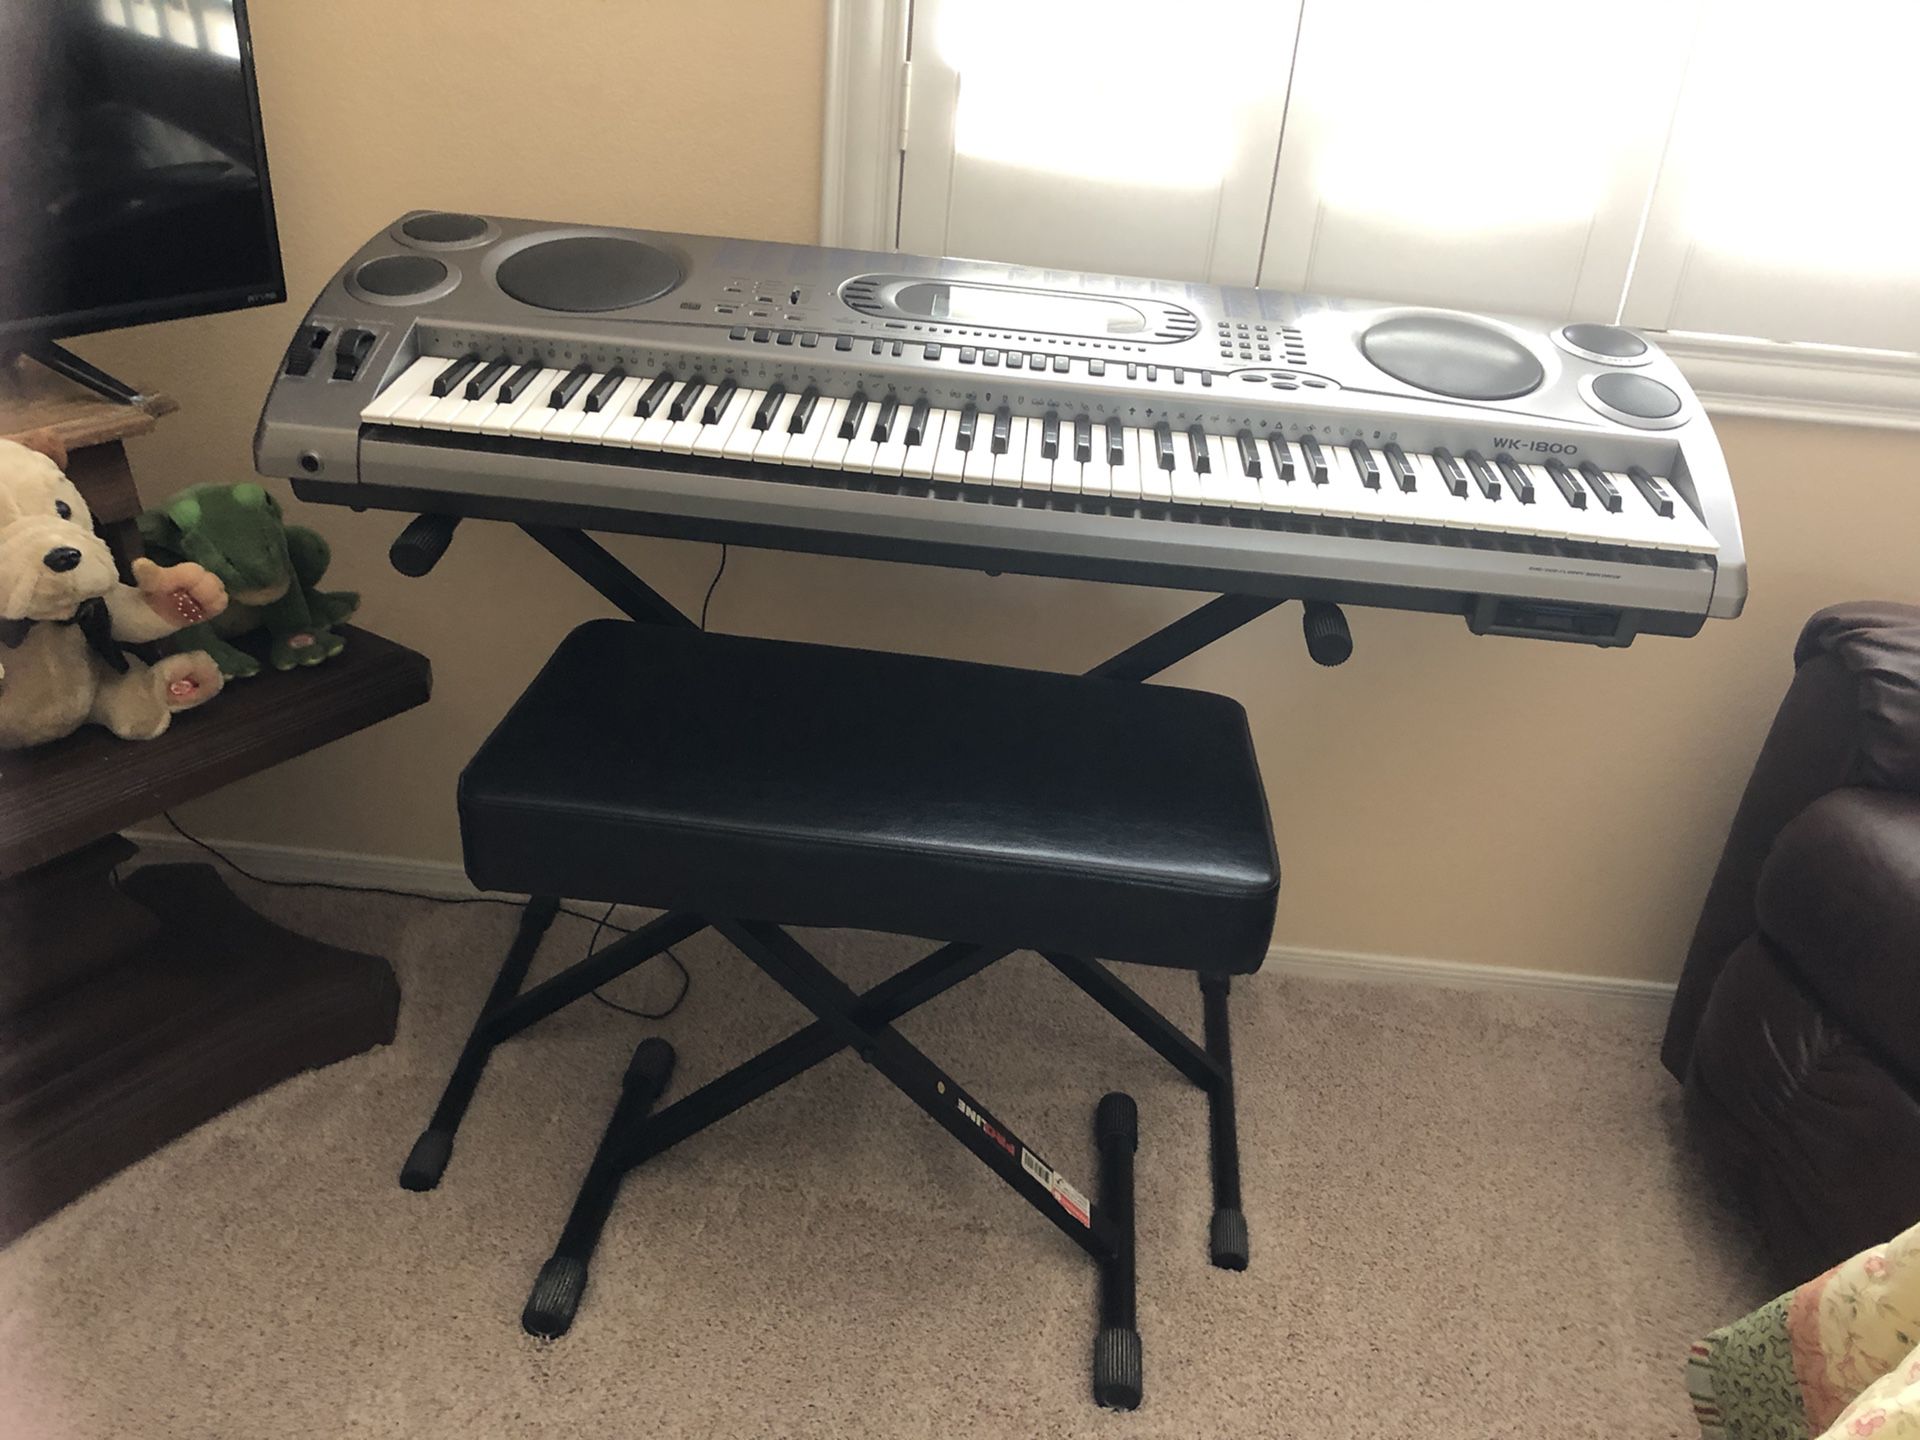 Almost new Casio Electric Keyboard. Belongs to a music teacher. Very well taken care of. to a music teacher